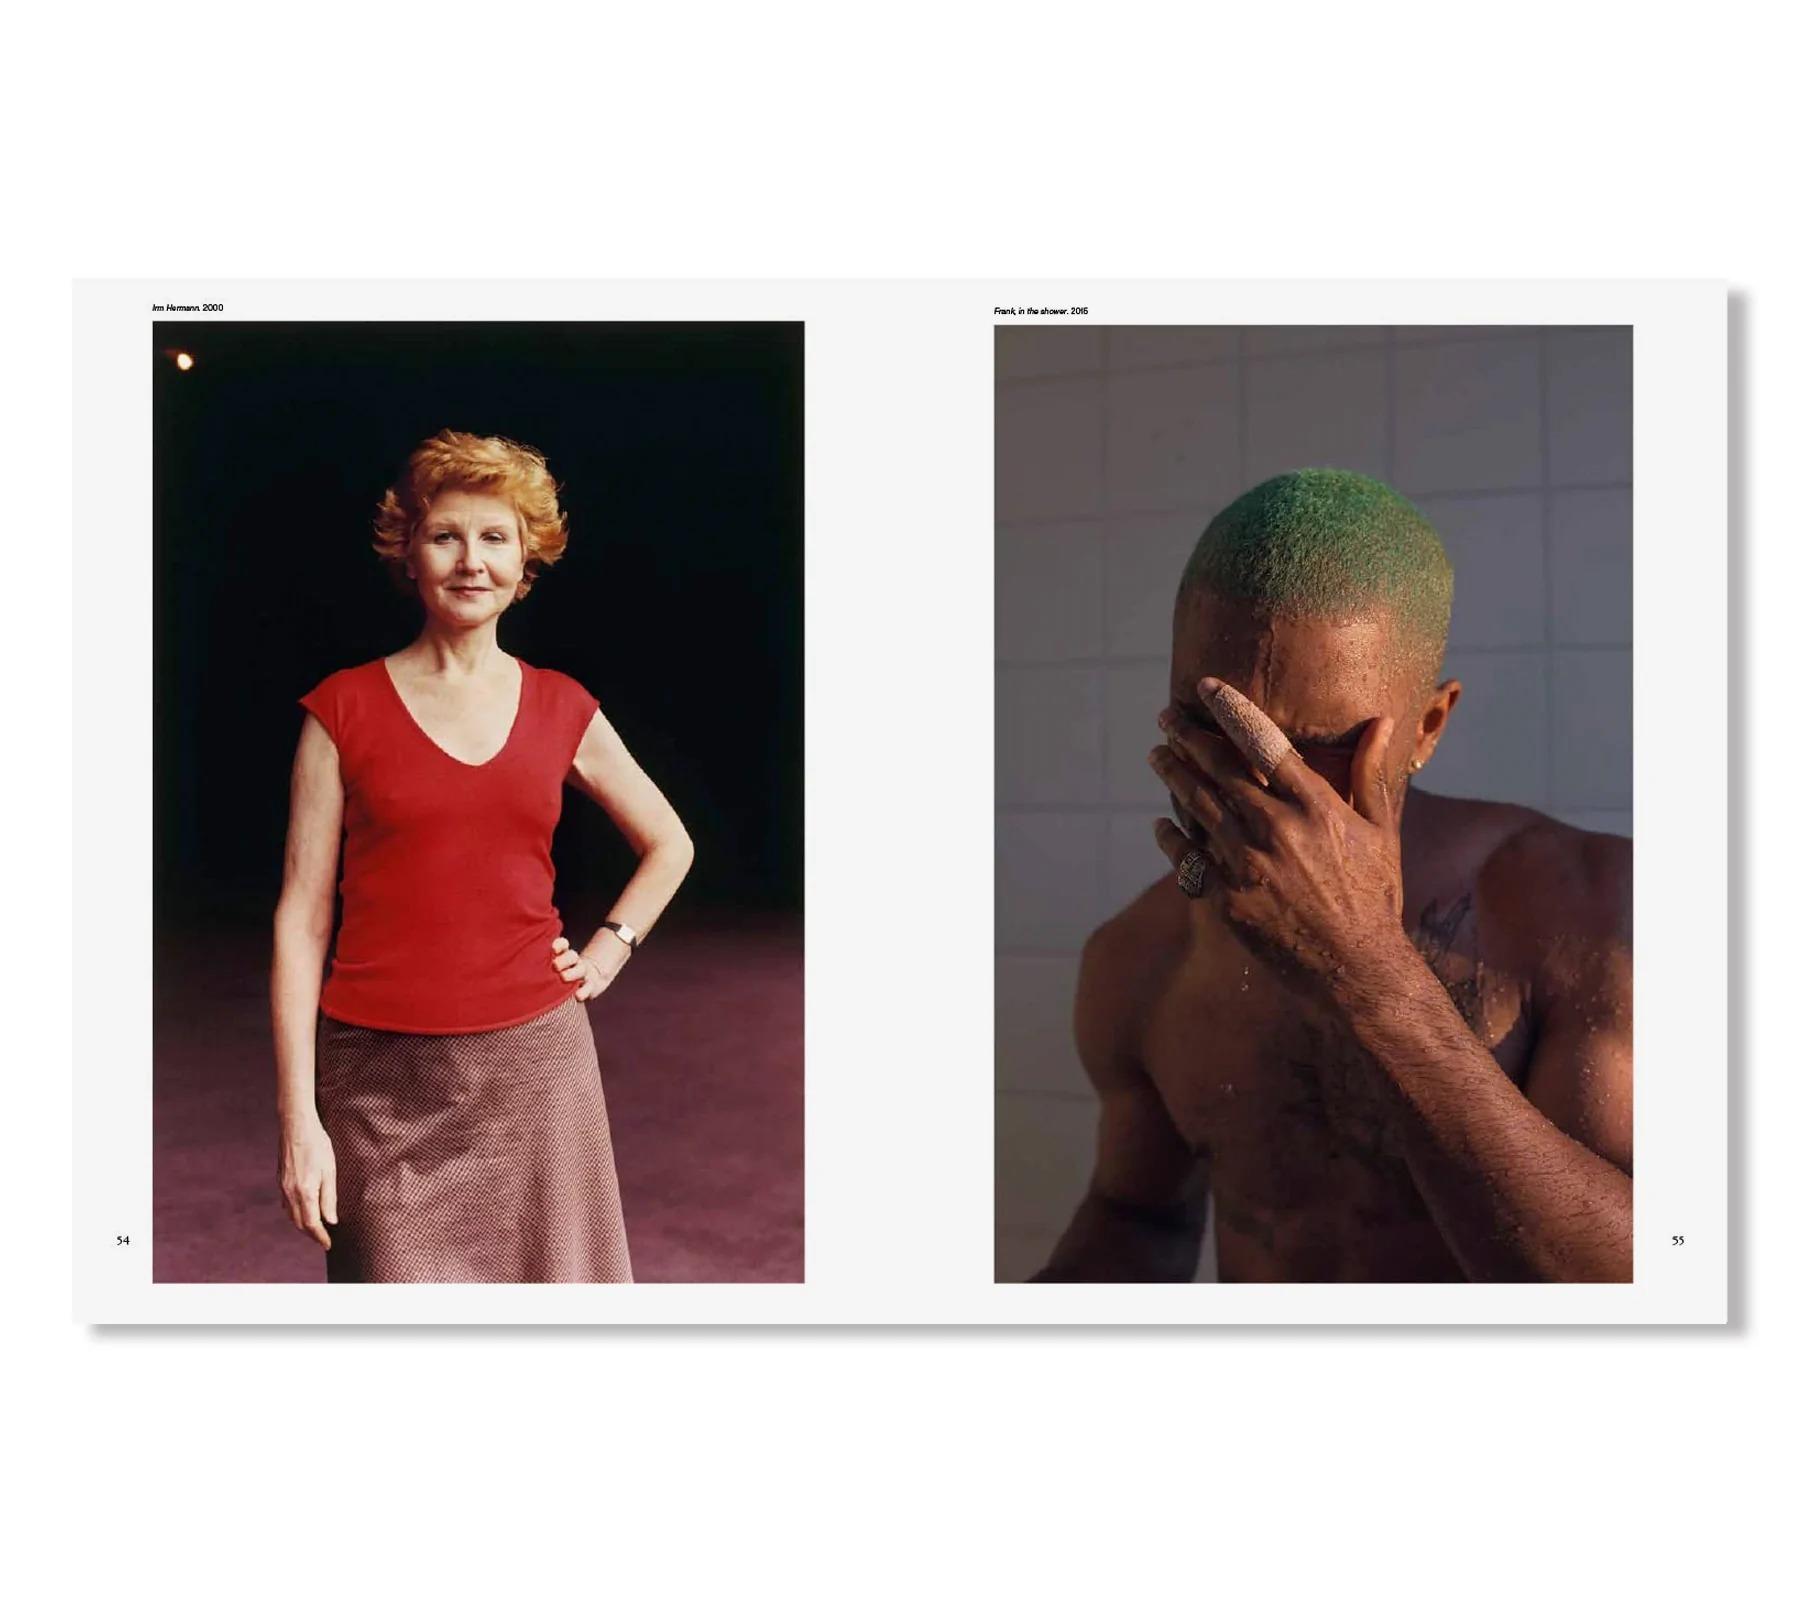 TO LOOK WITHOUT FEAR by Wolfgang Tillmans ヴォルフガング・ティルマンス 作品集